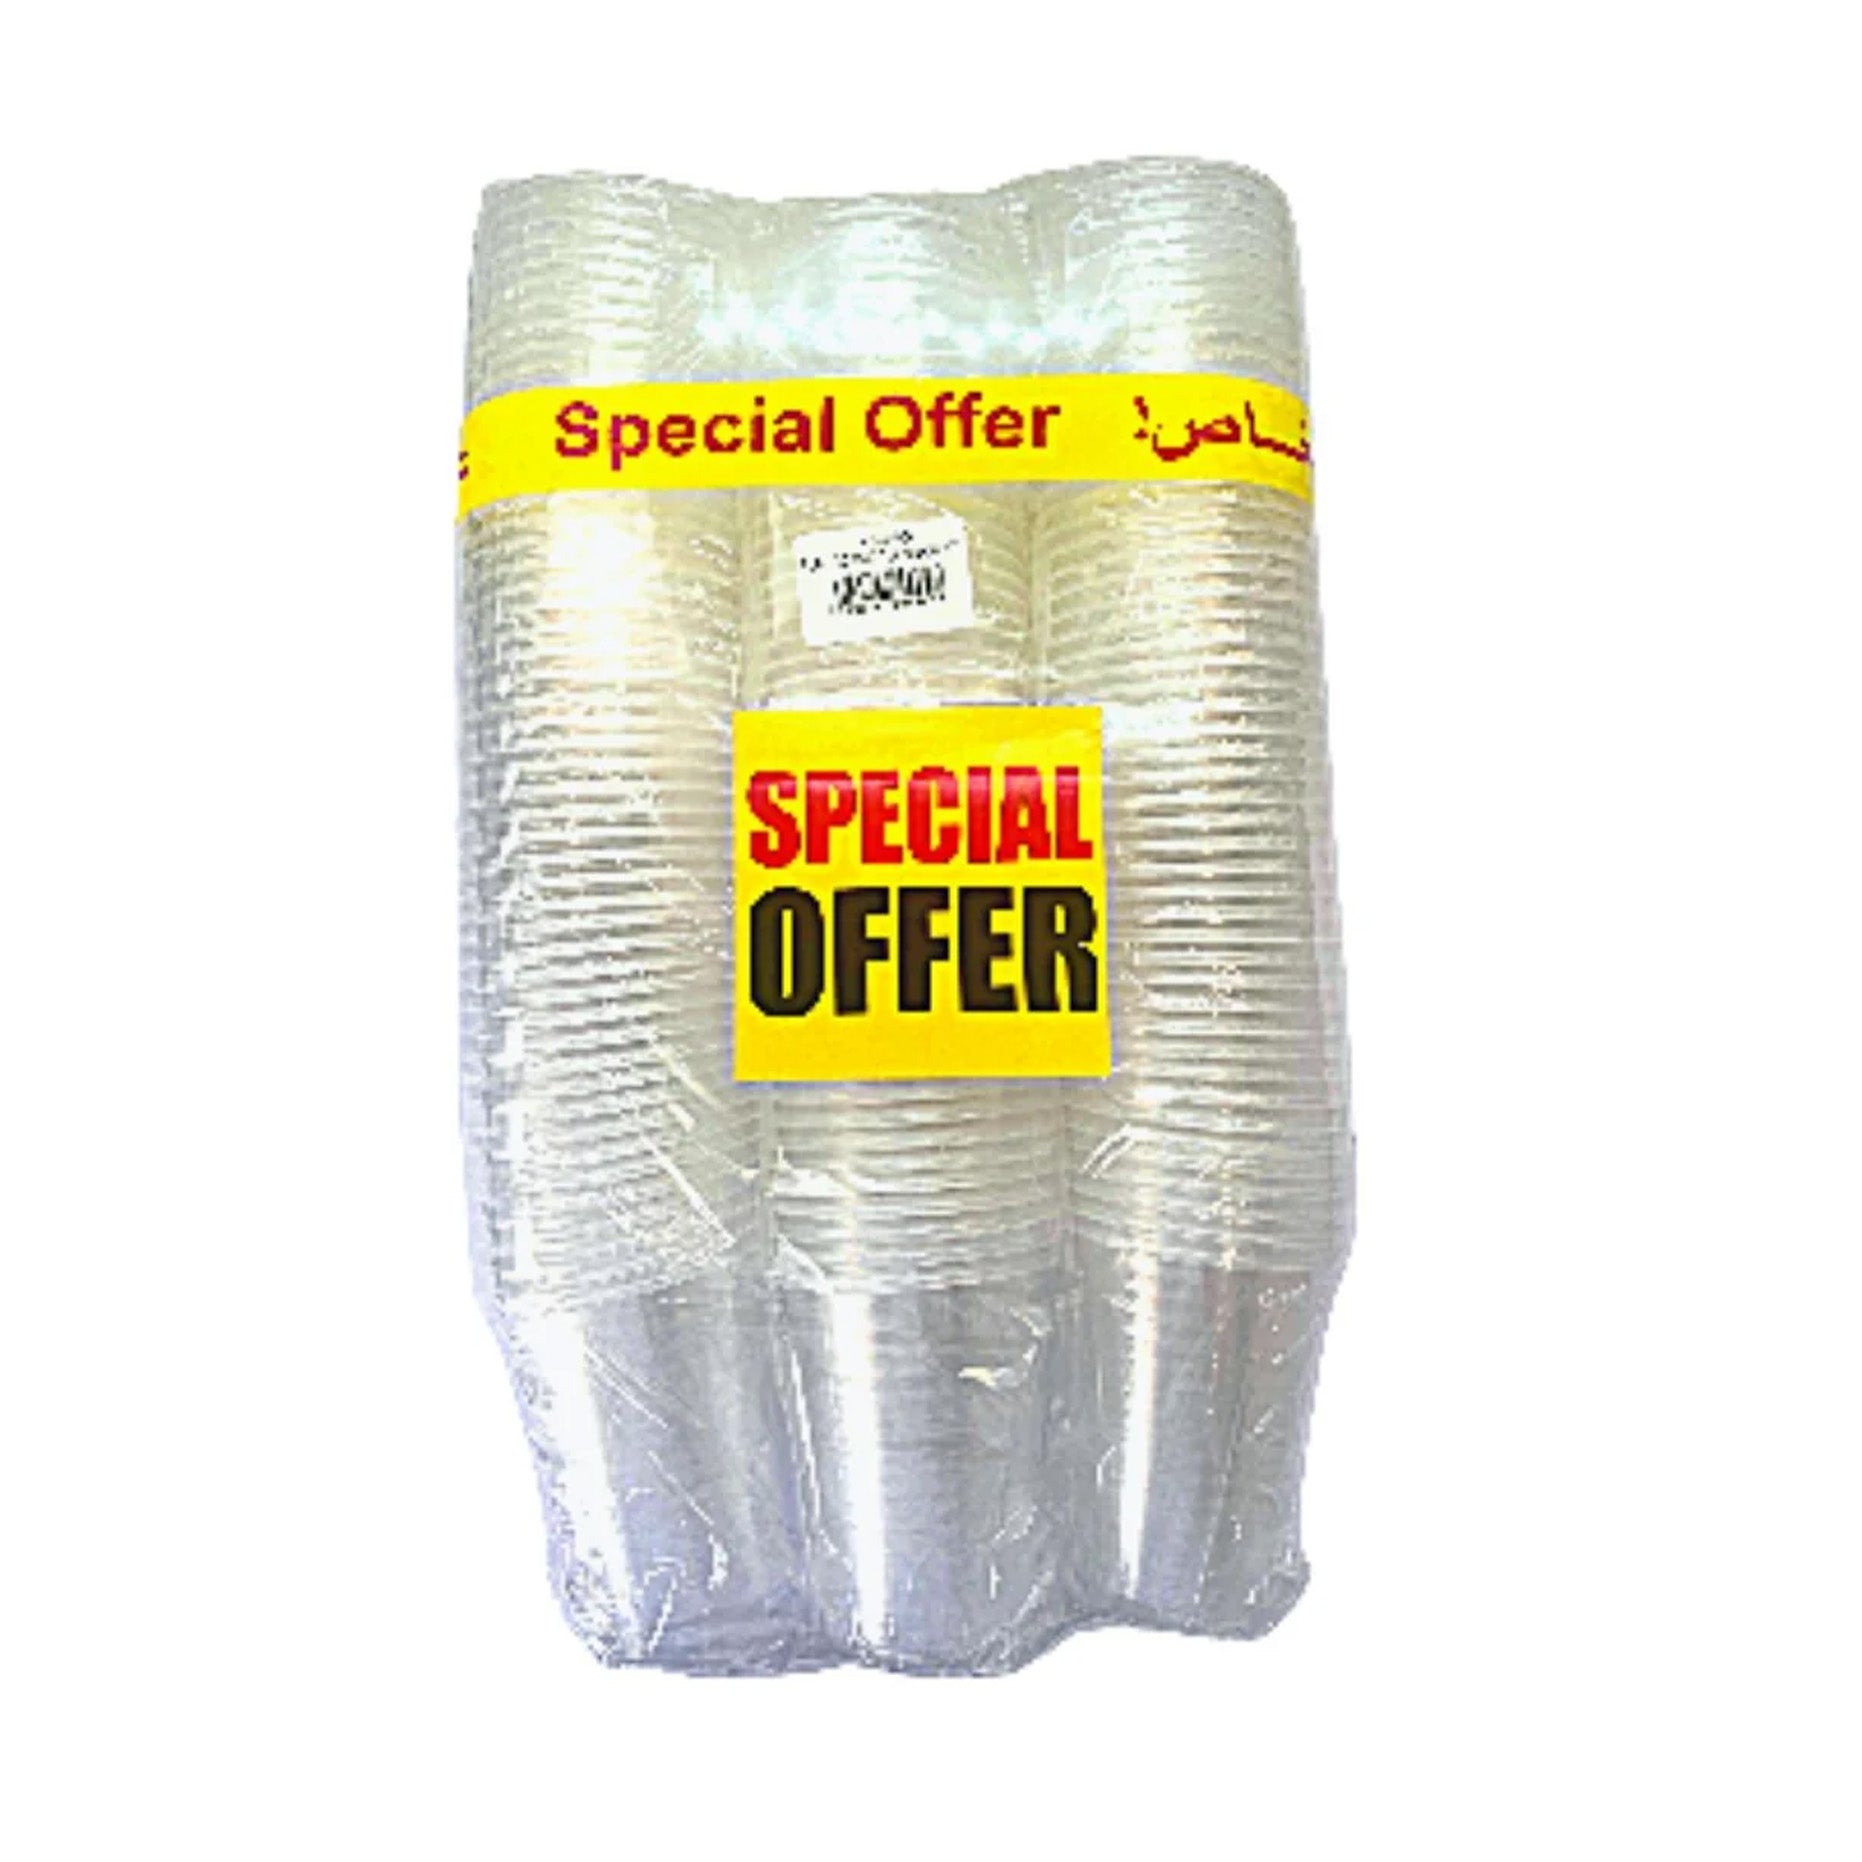 7 Oz Plastic Cup (Special Offer Pack)